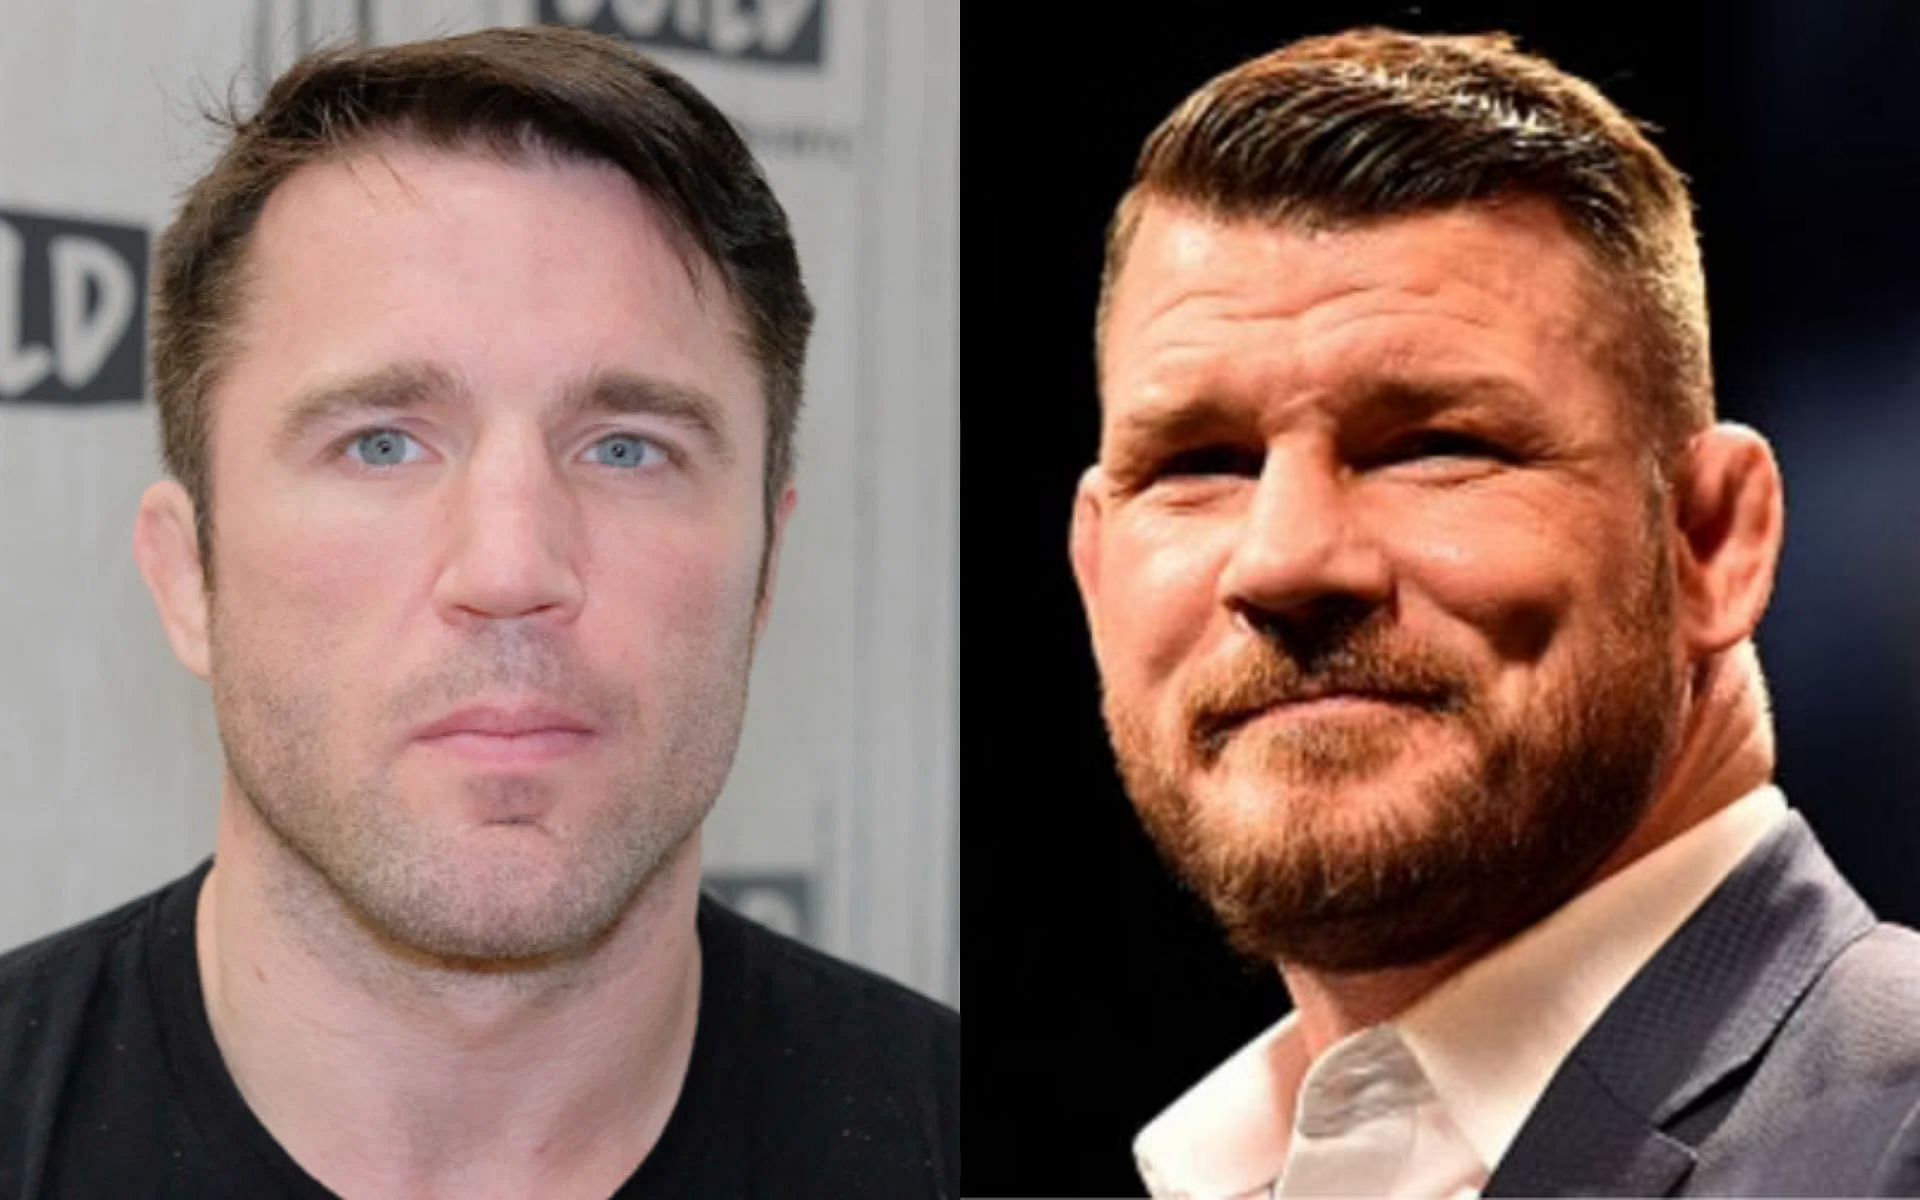 Chael Sonnen (left) and Michael Bisping (right)